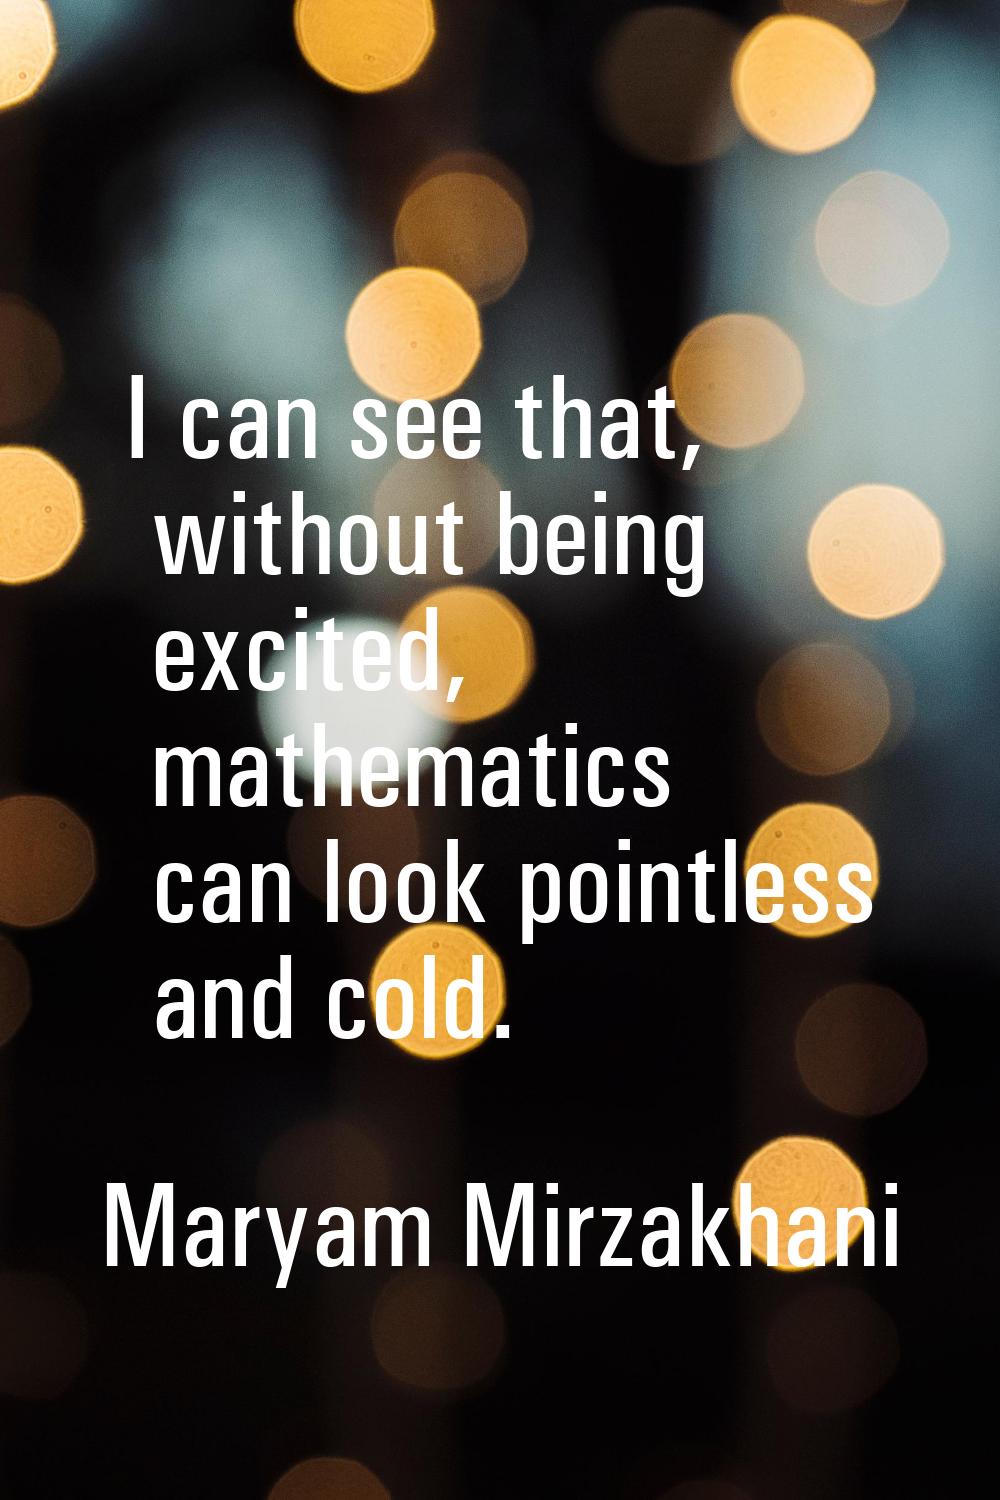 I can see that, without being excited, mathematics can look pointless and cold.